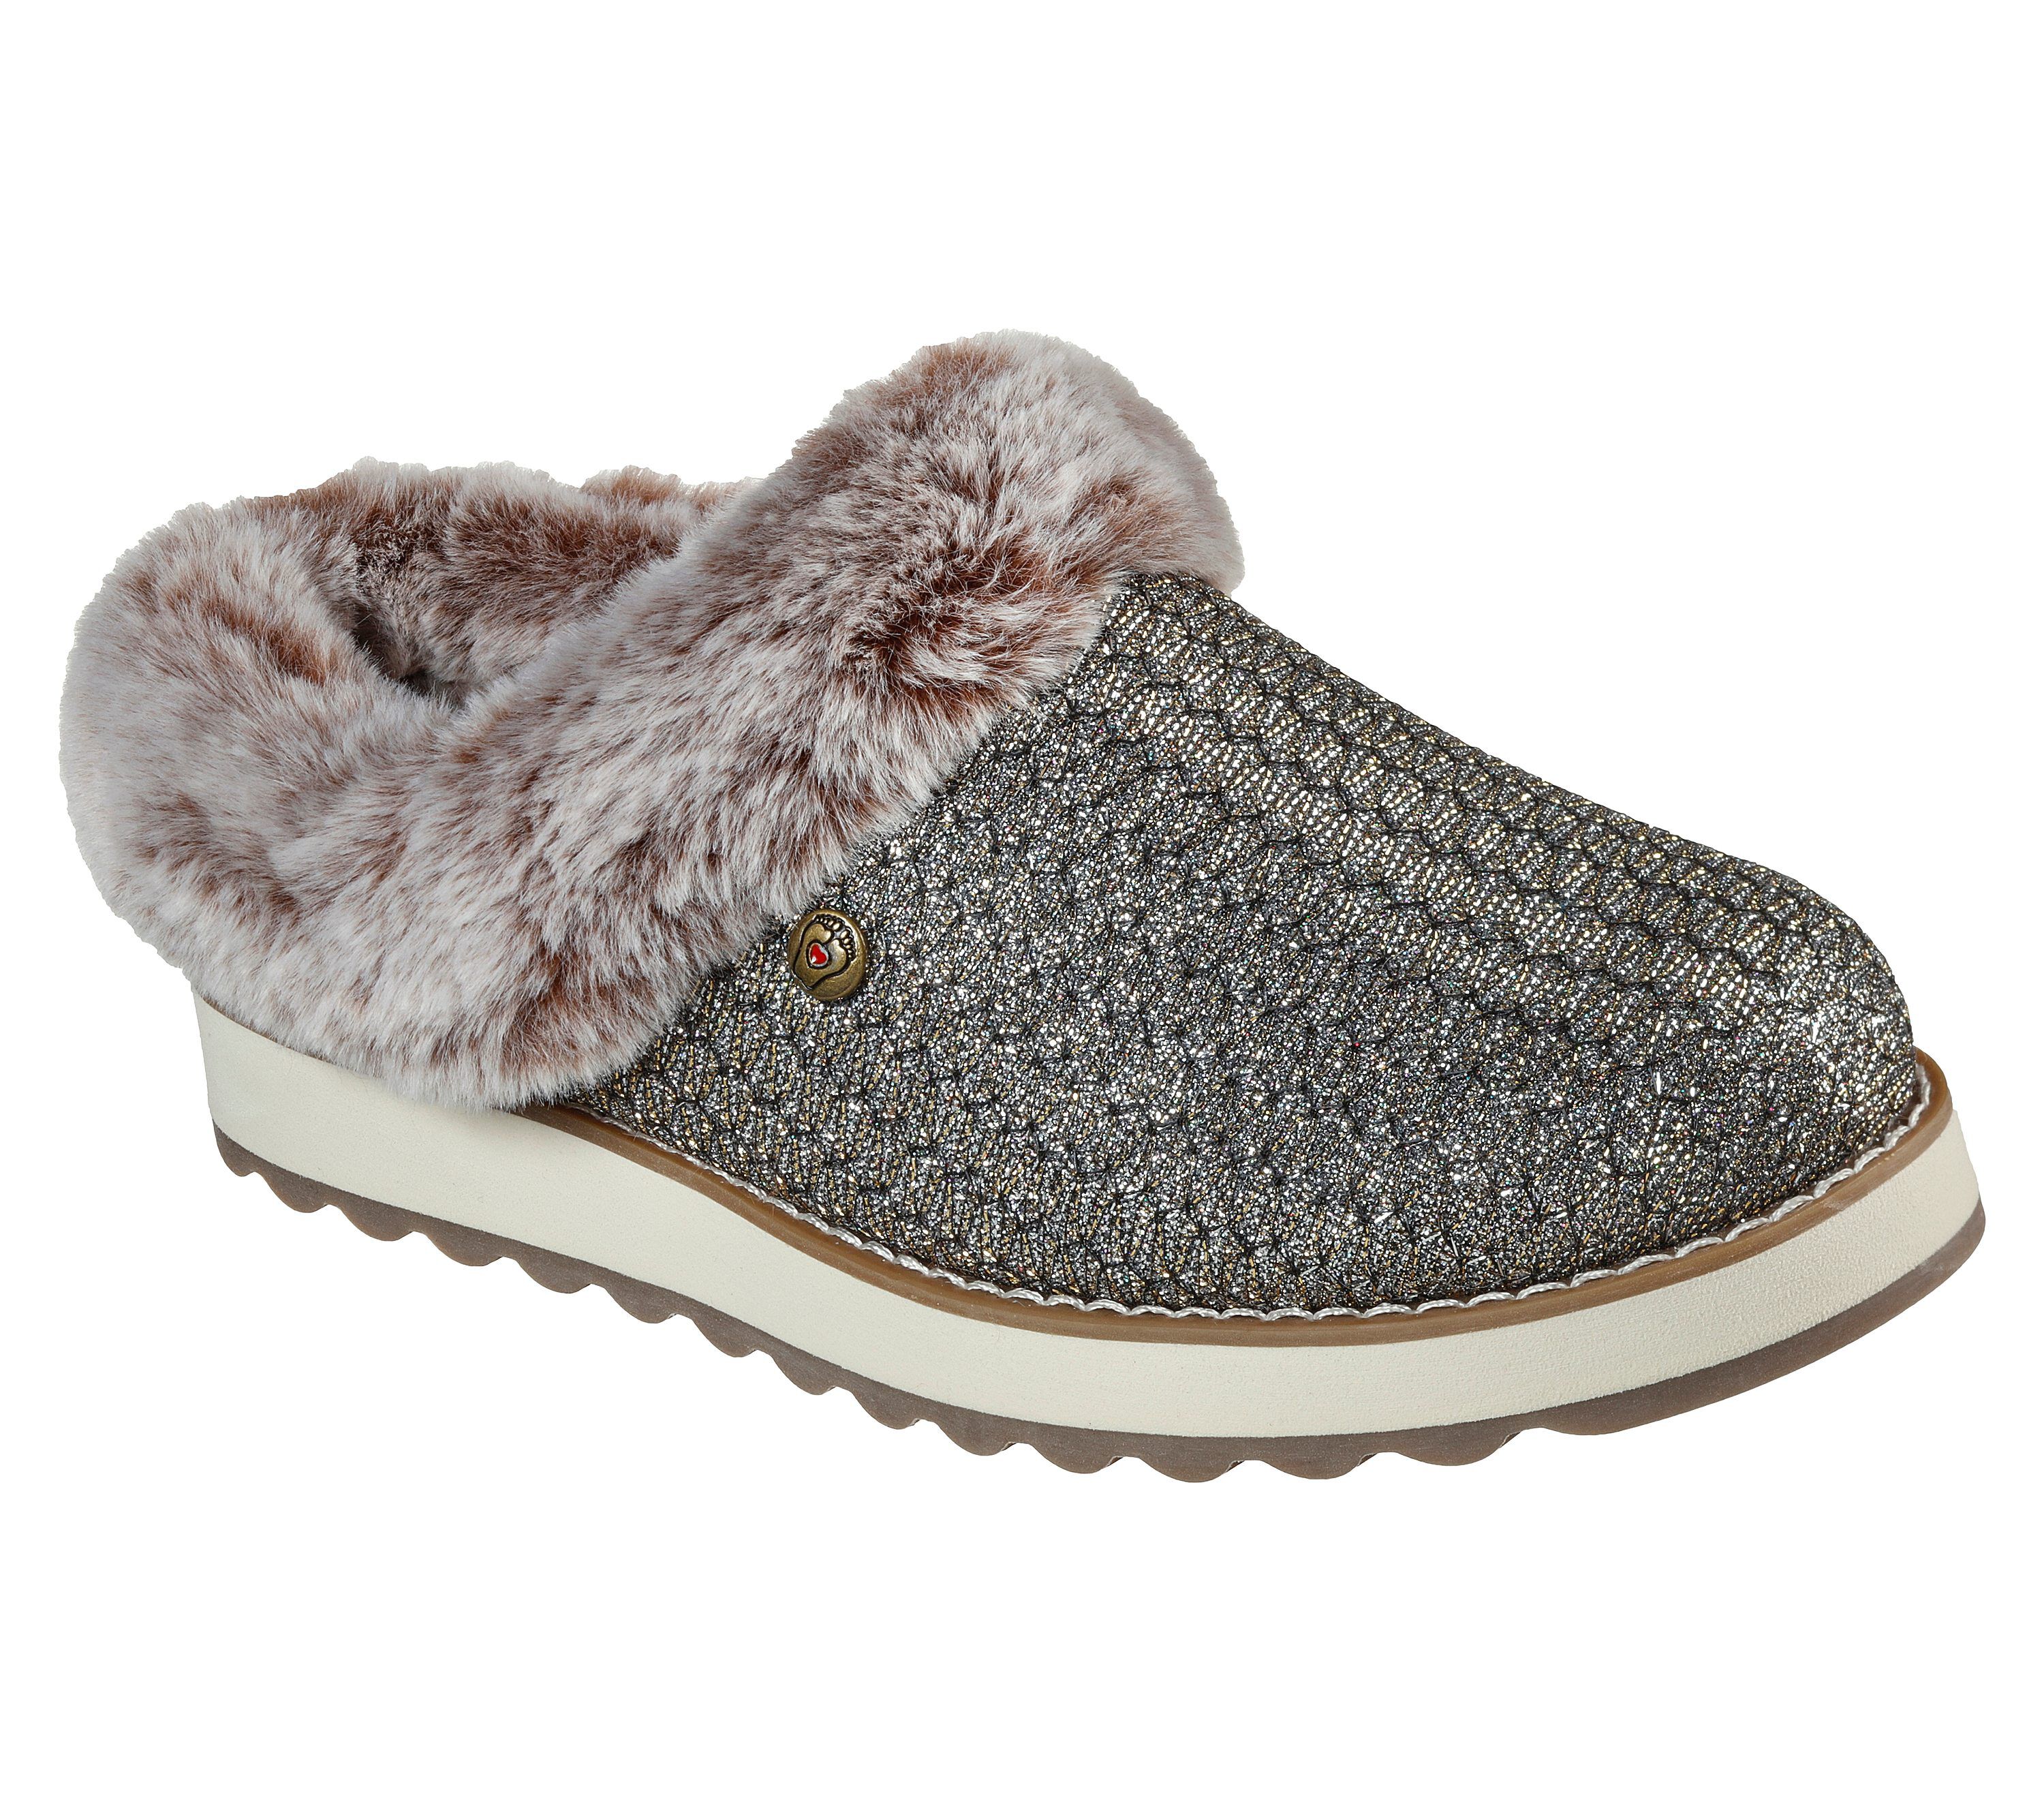 Skechers Cozy Campfire Slipper Boots With Faux Fur Meant To